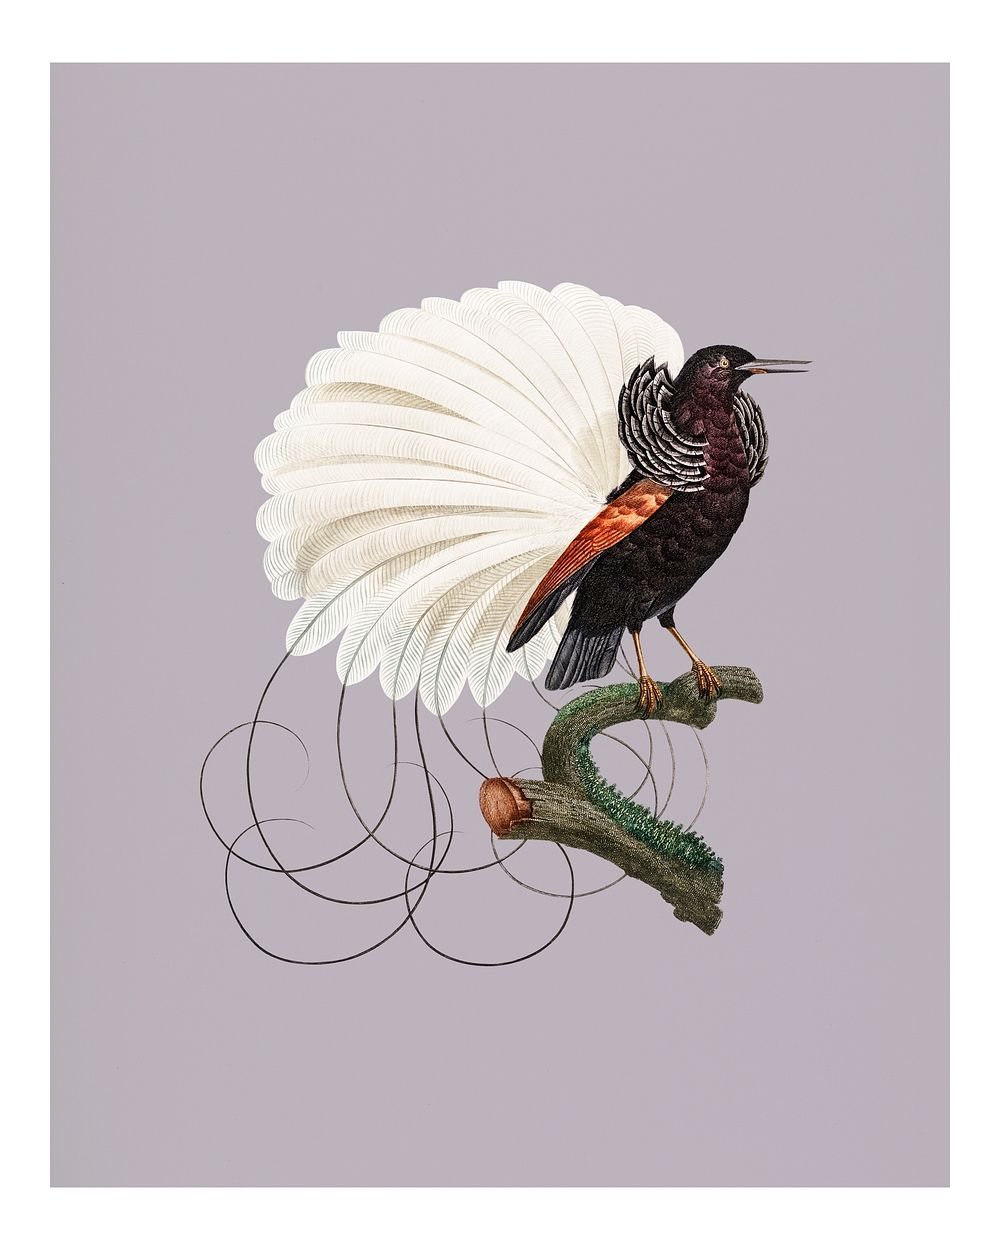 Vintage twelve wired bird of paradise illustration wall art print and poster.